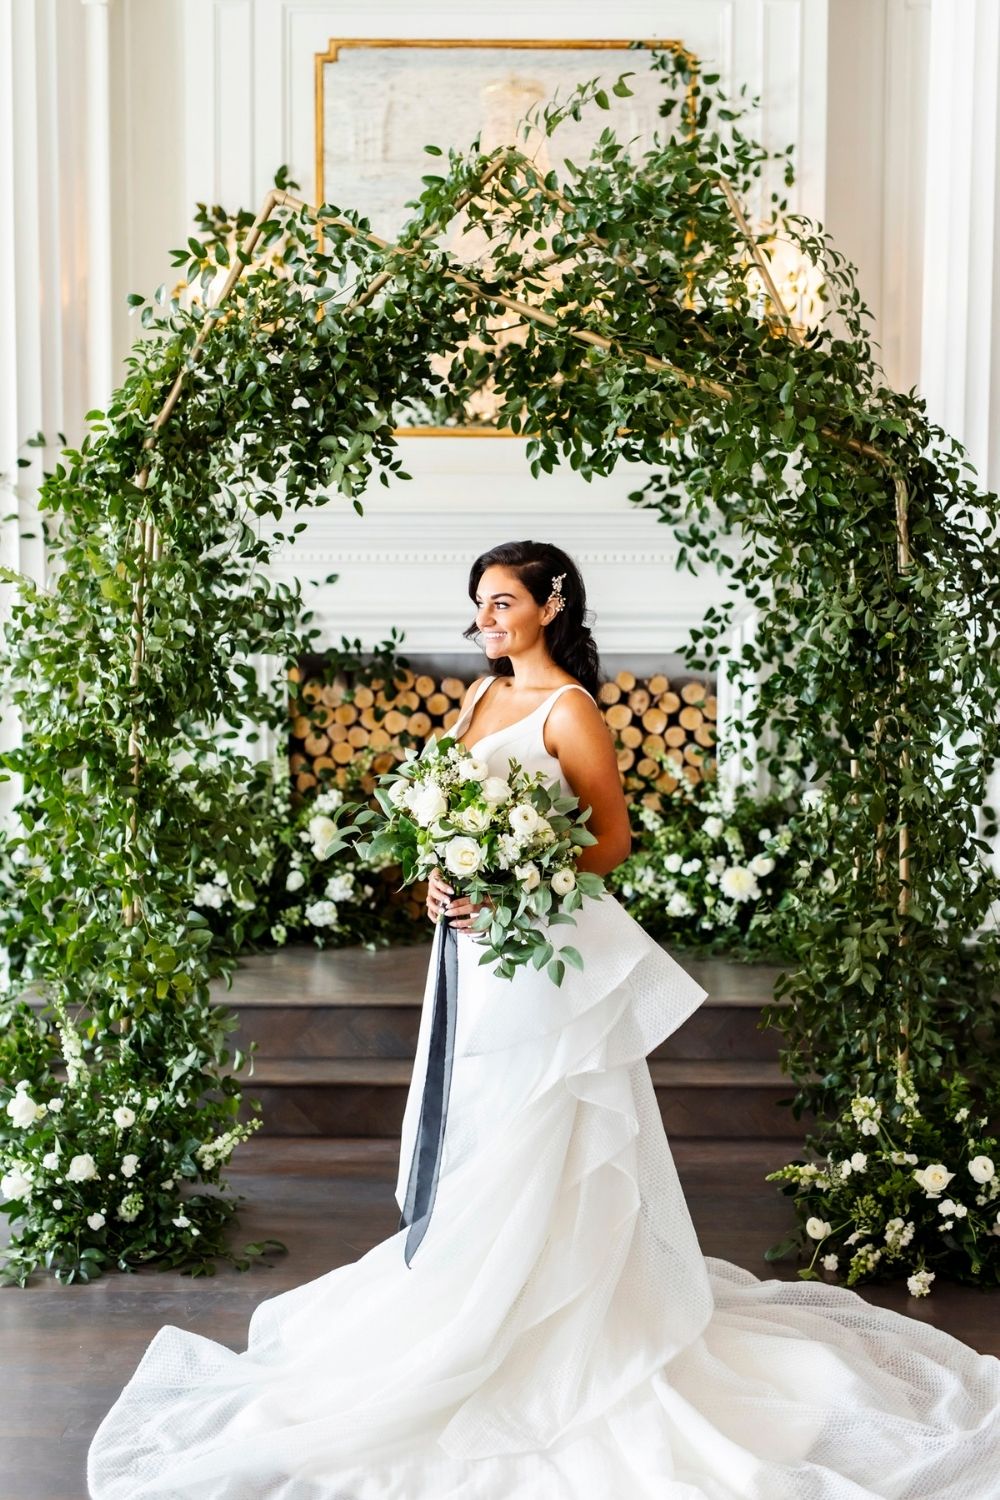 Bride in a white wedding gown with green and white bouquet